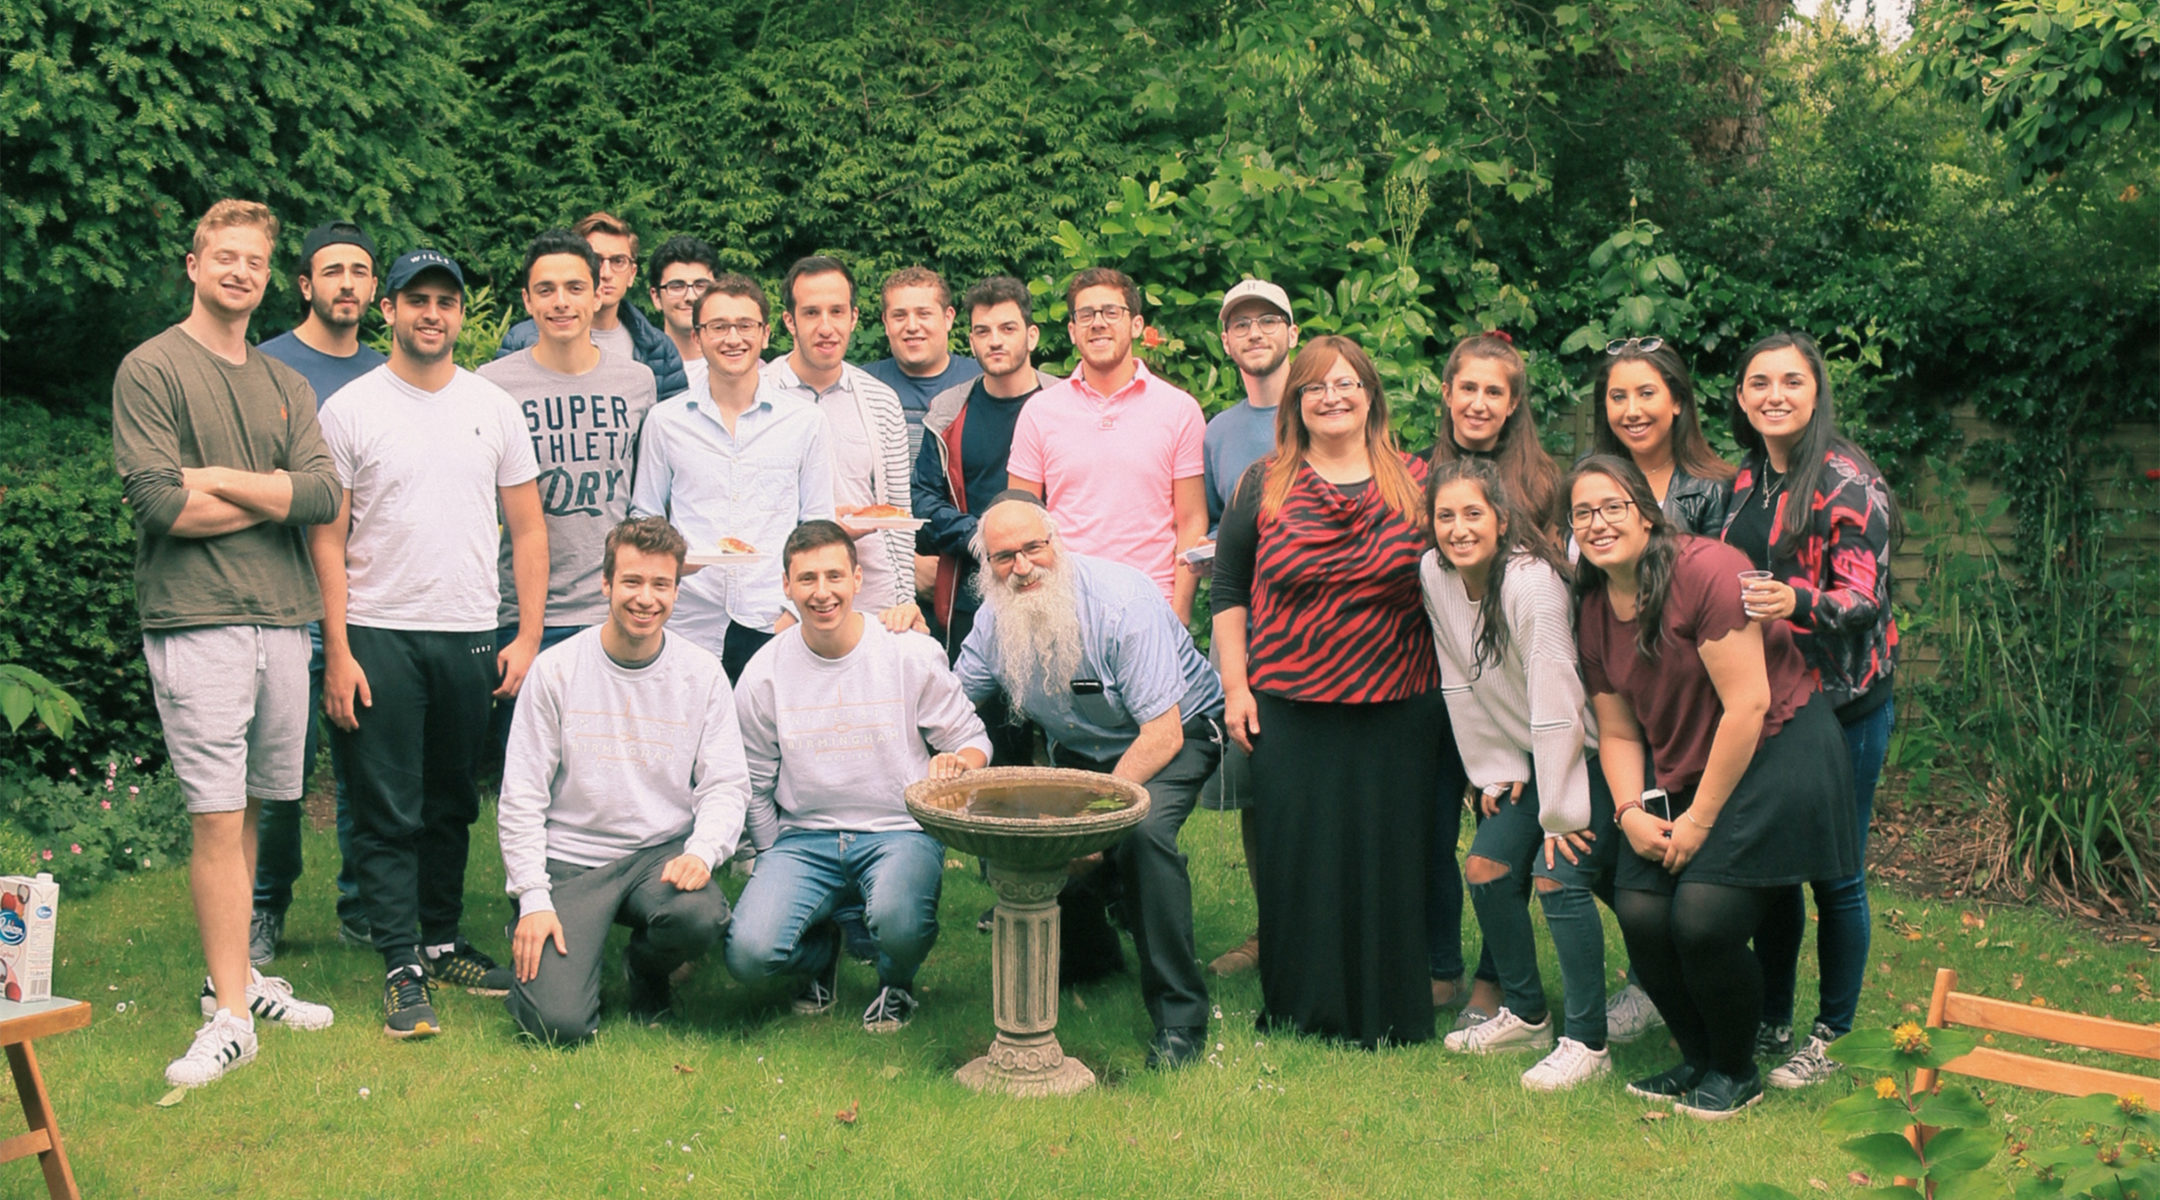 Rabbi Fishel Cohen, wearing a kippah, and his wife Esther with Birmigham university students at the local Hillel House in July 2018. (Courtesy of Rabbi Cohen)